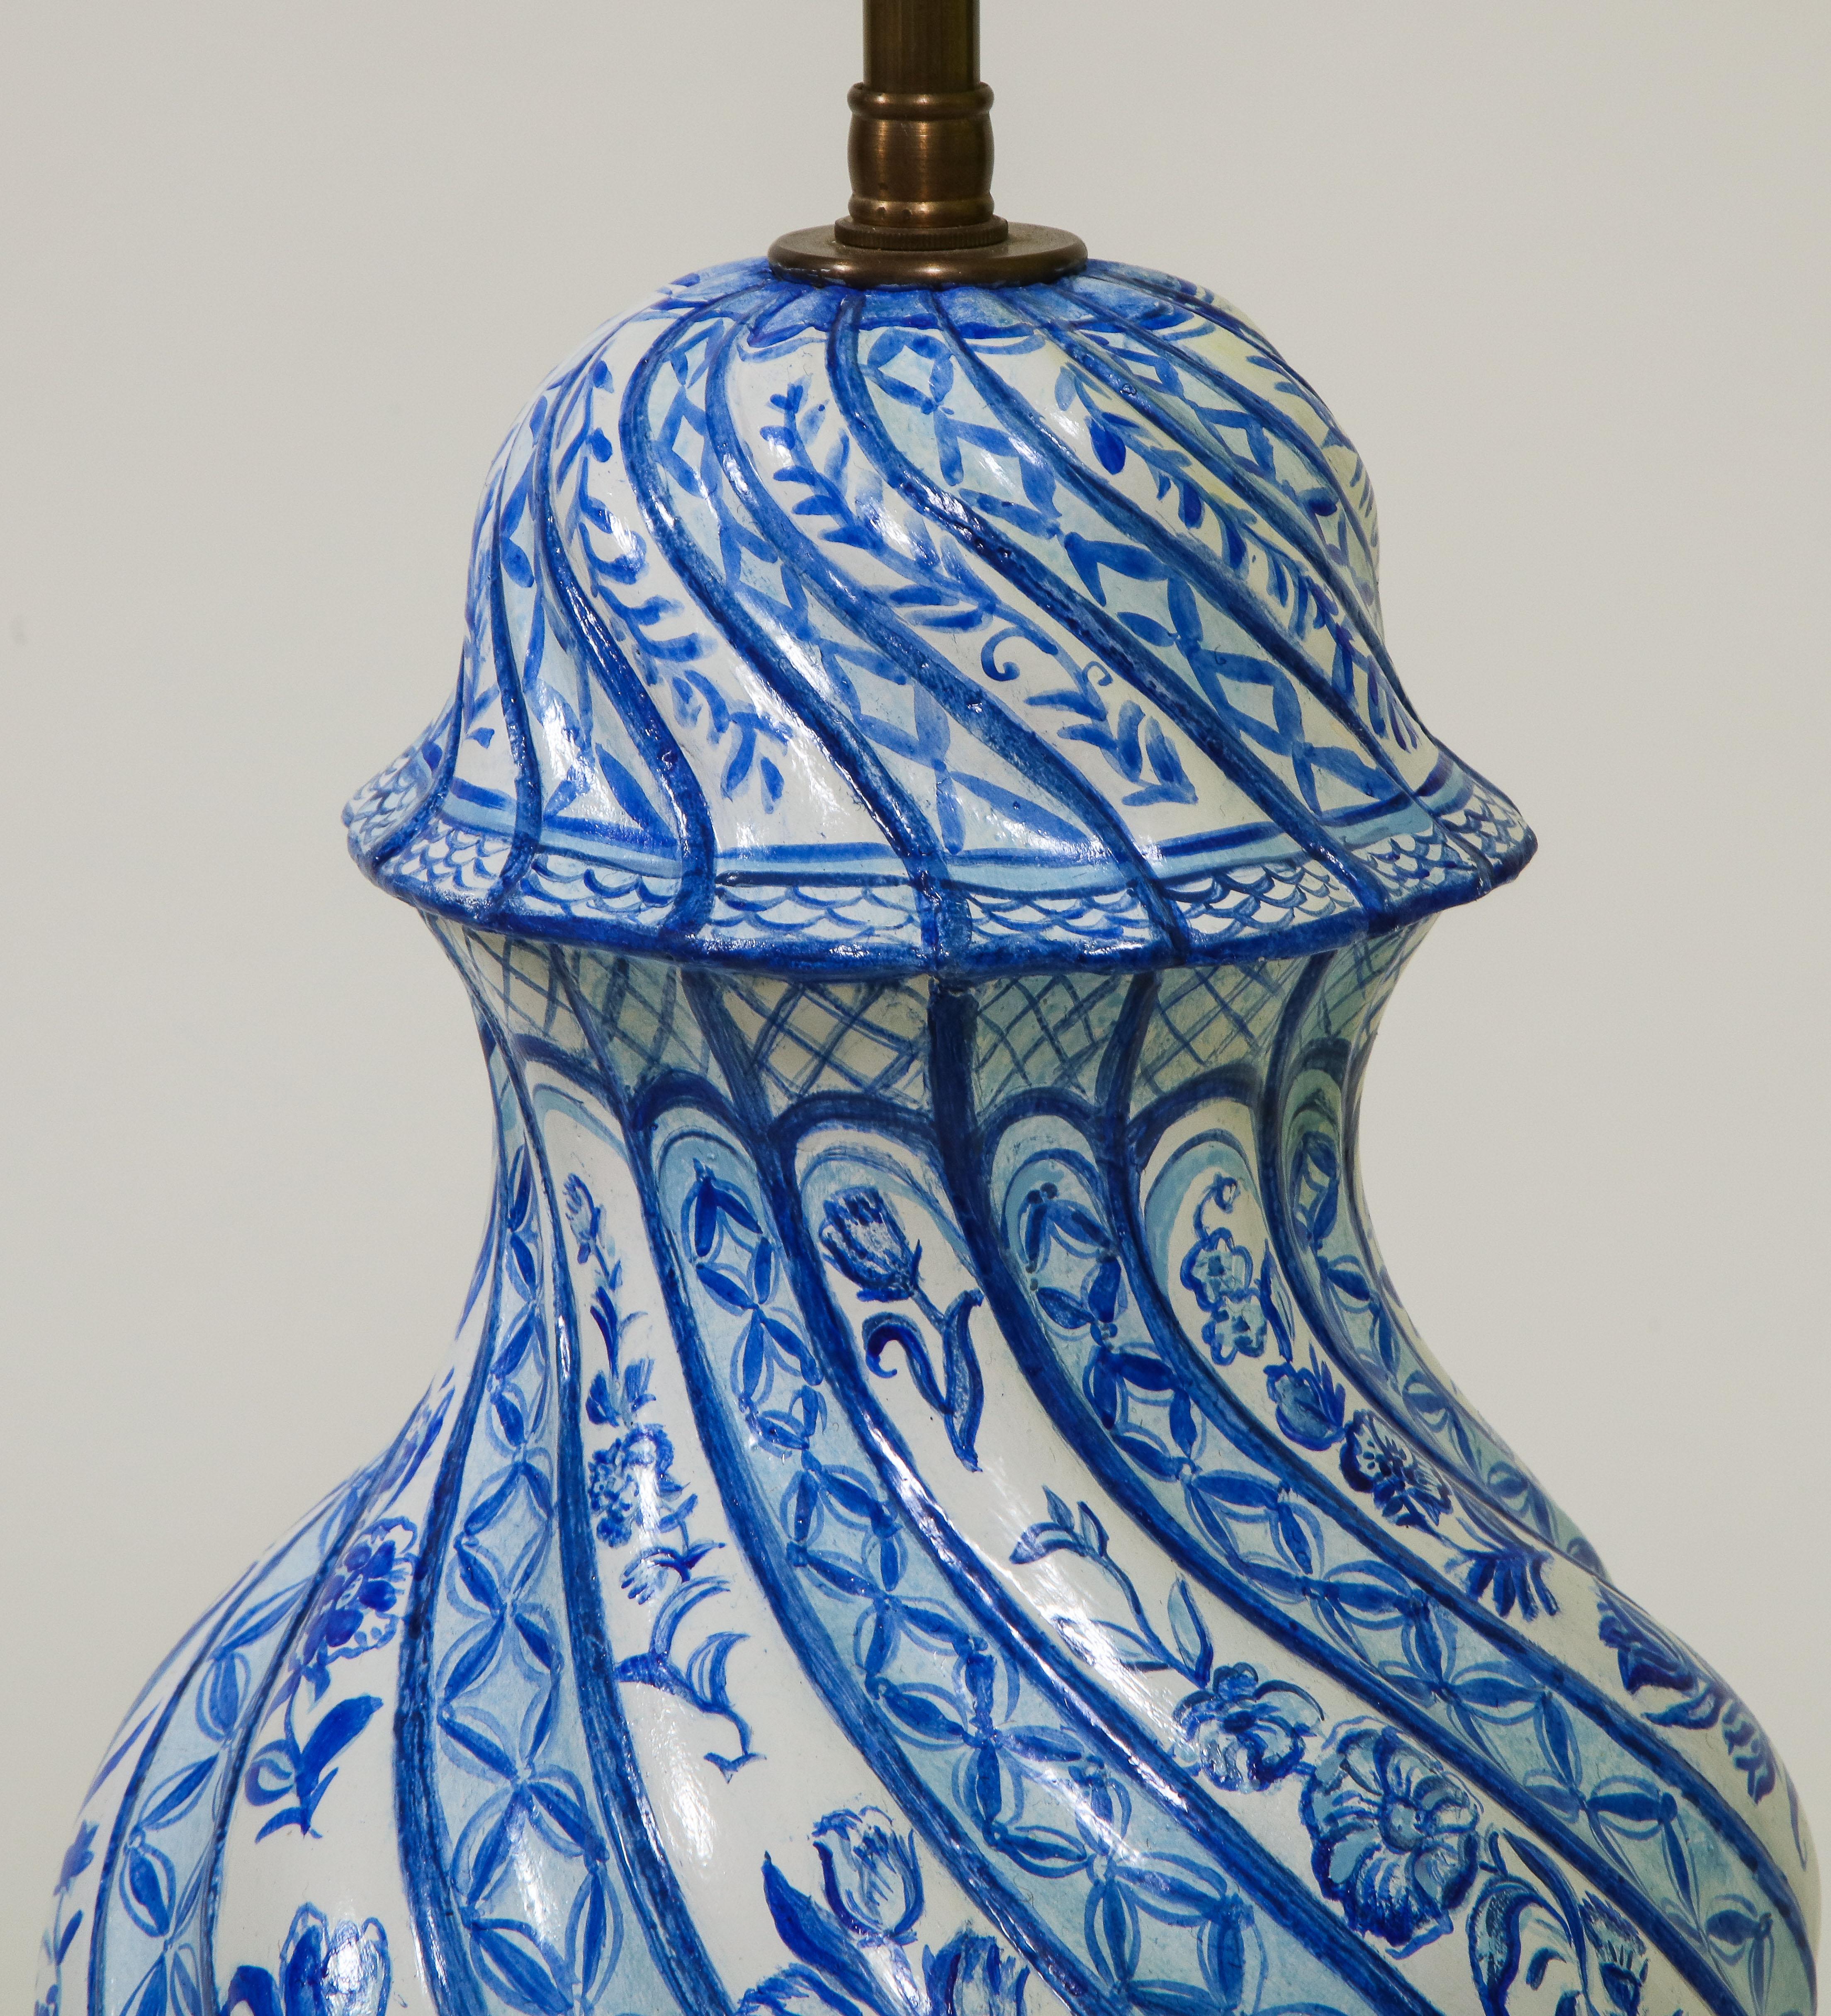 A special collaboration featuring a vintage lamp from the collection of Mario Buatta hand-painted by decorative artist Haleh Atabeigi who worked with the designer for years. Inspired by the Delft ceramics beloved and collected voraciously by Buatta,